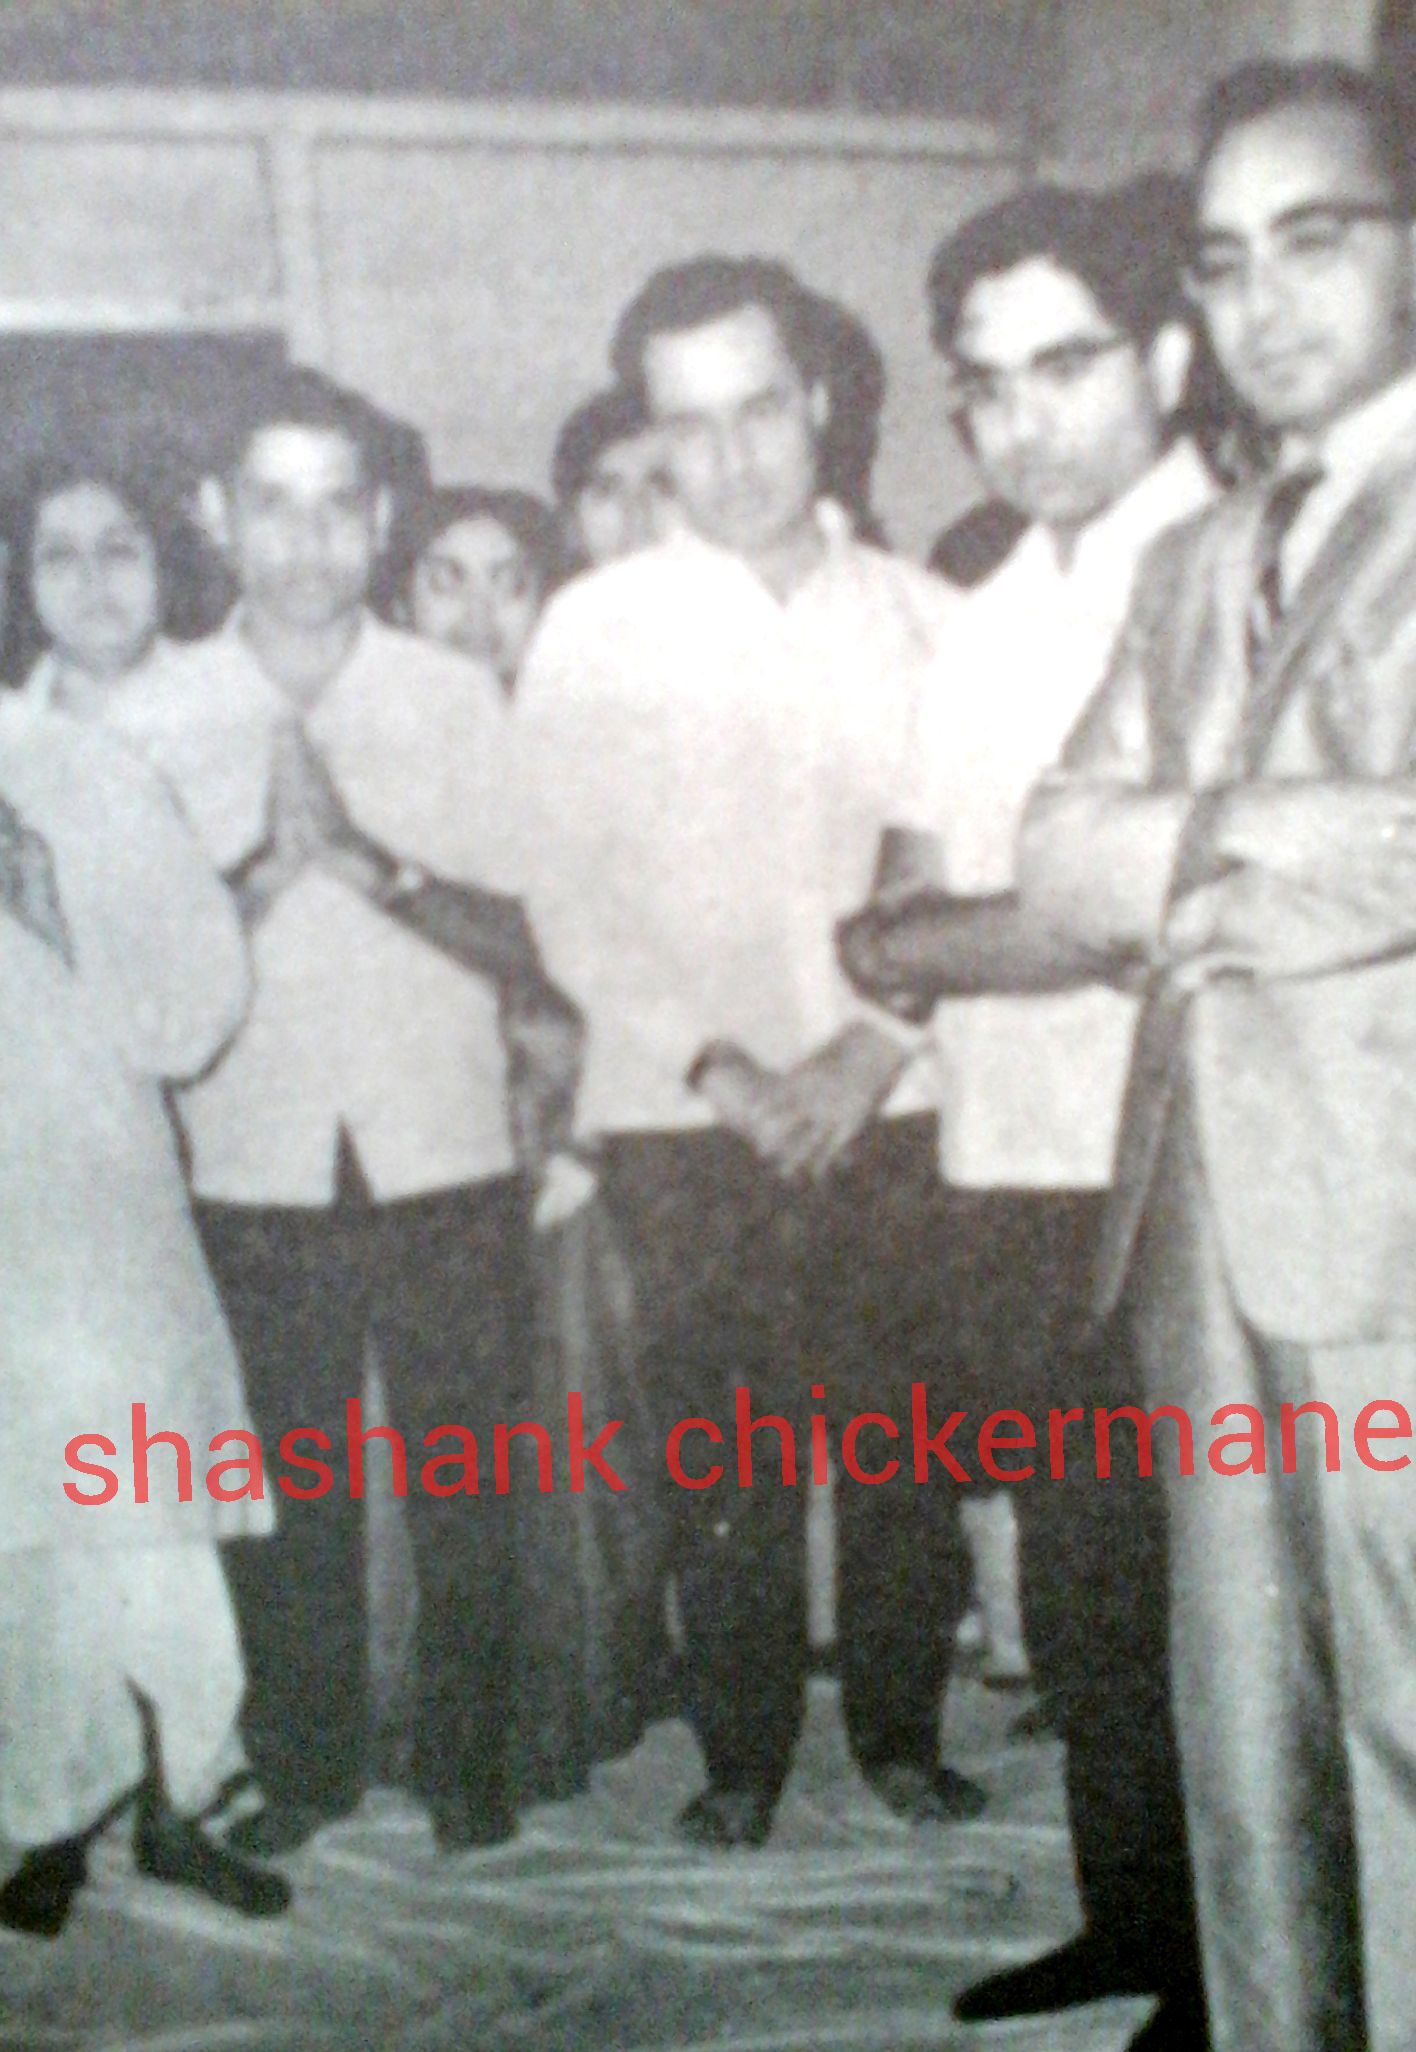 Mukesh with others